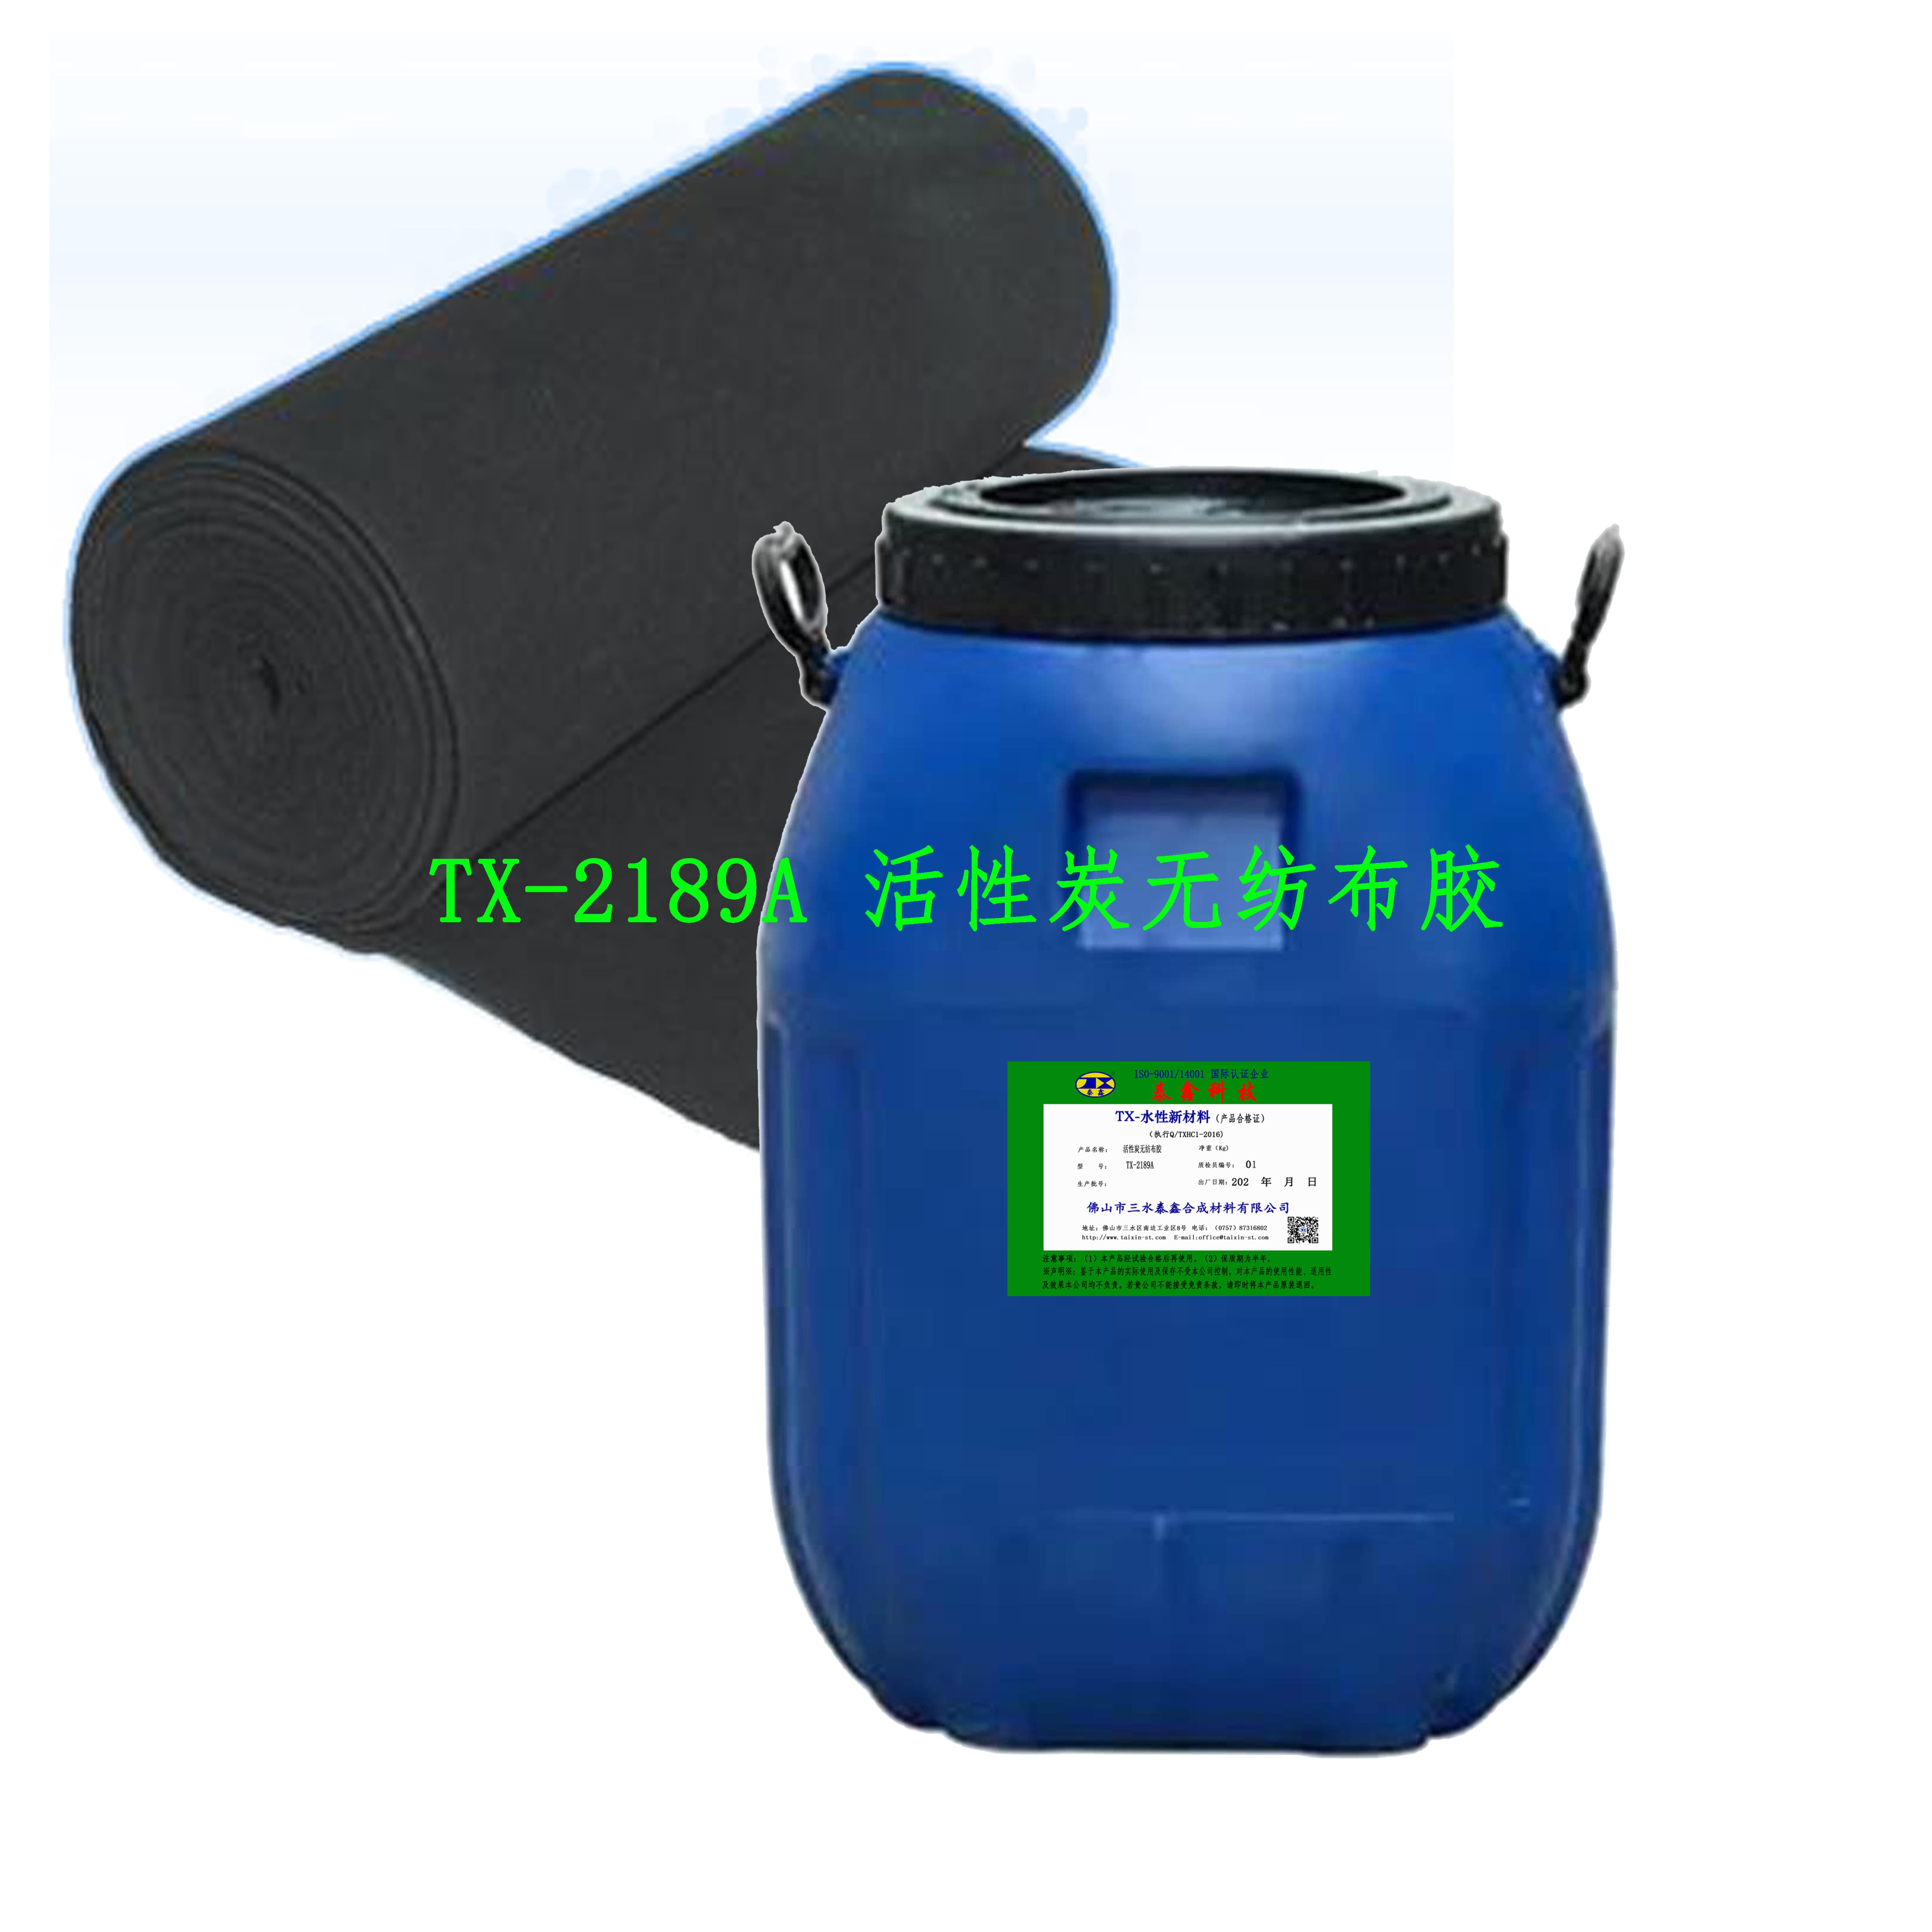 TX-2189A activated carbon non-woven fabric adhesive